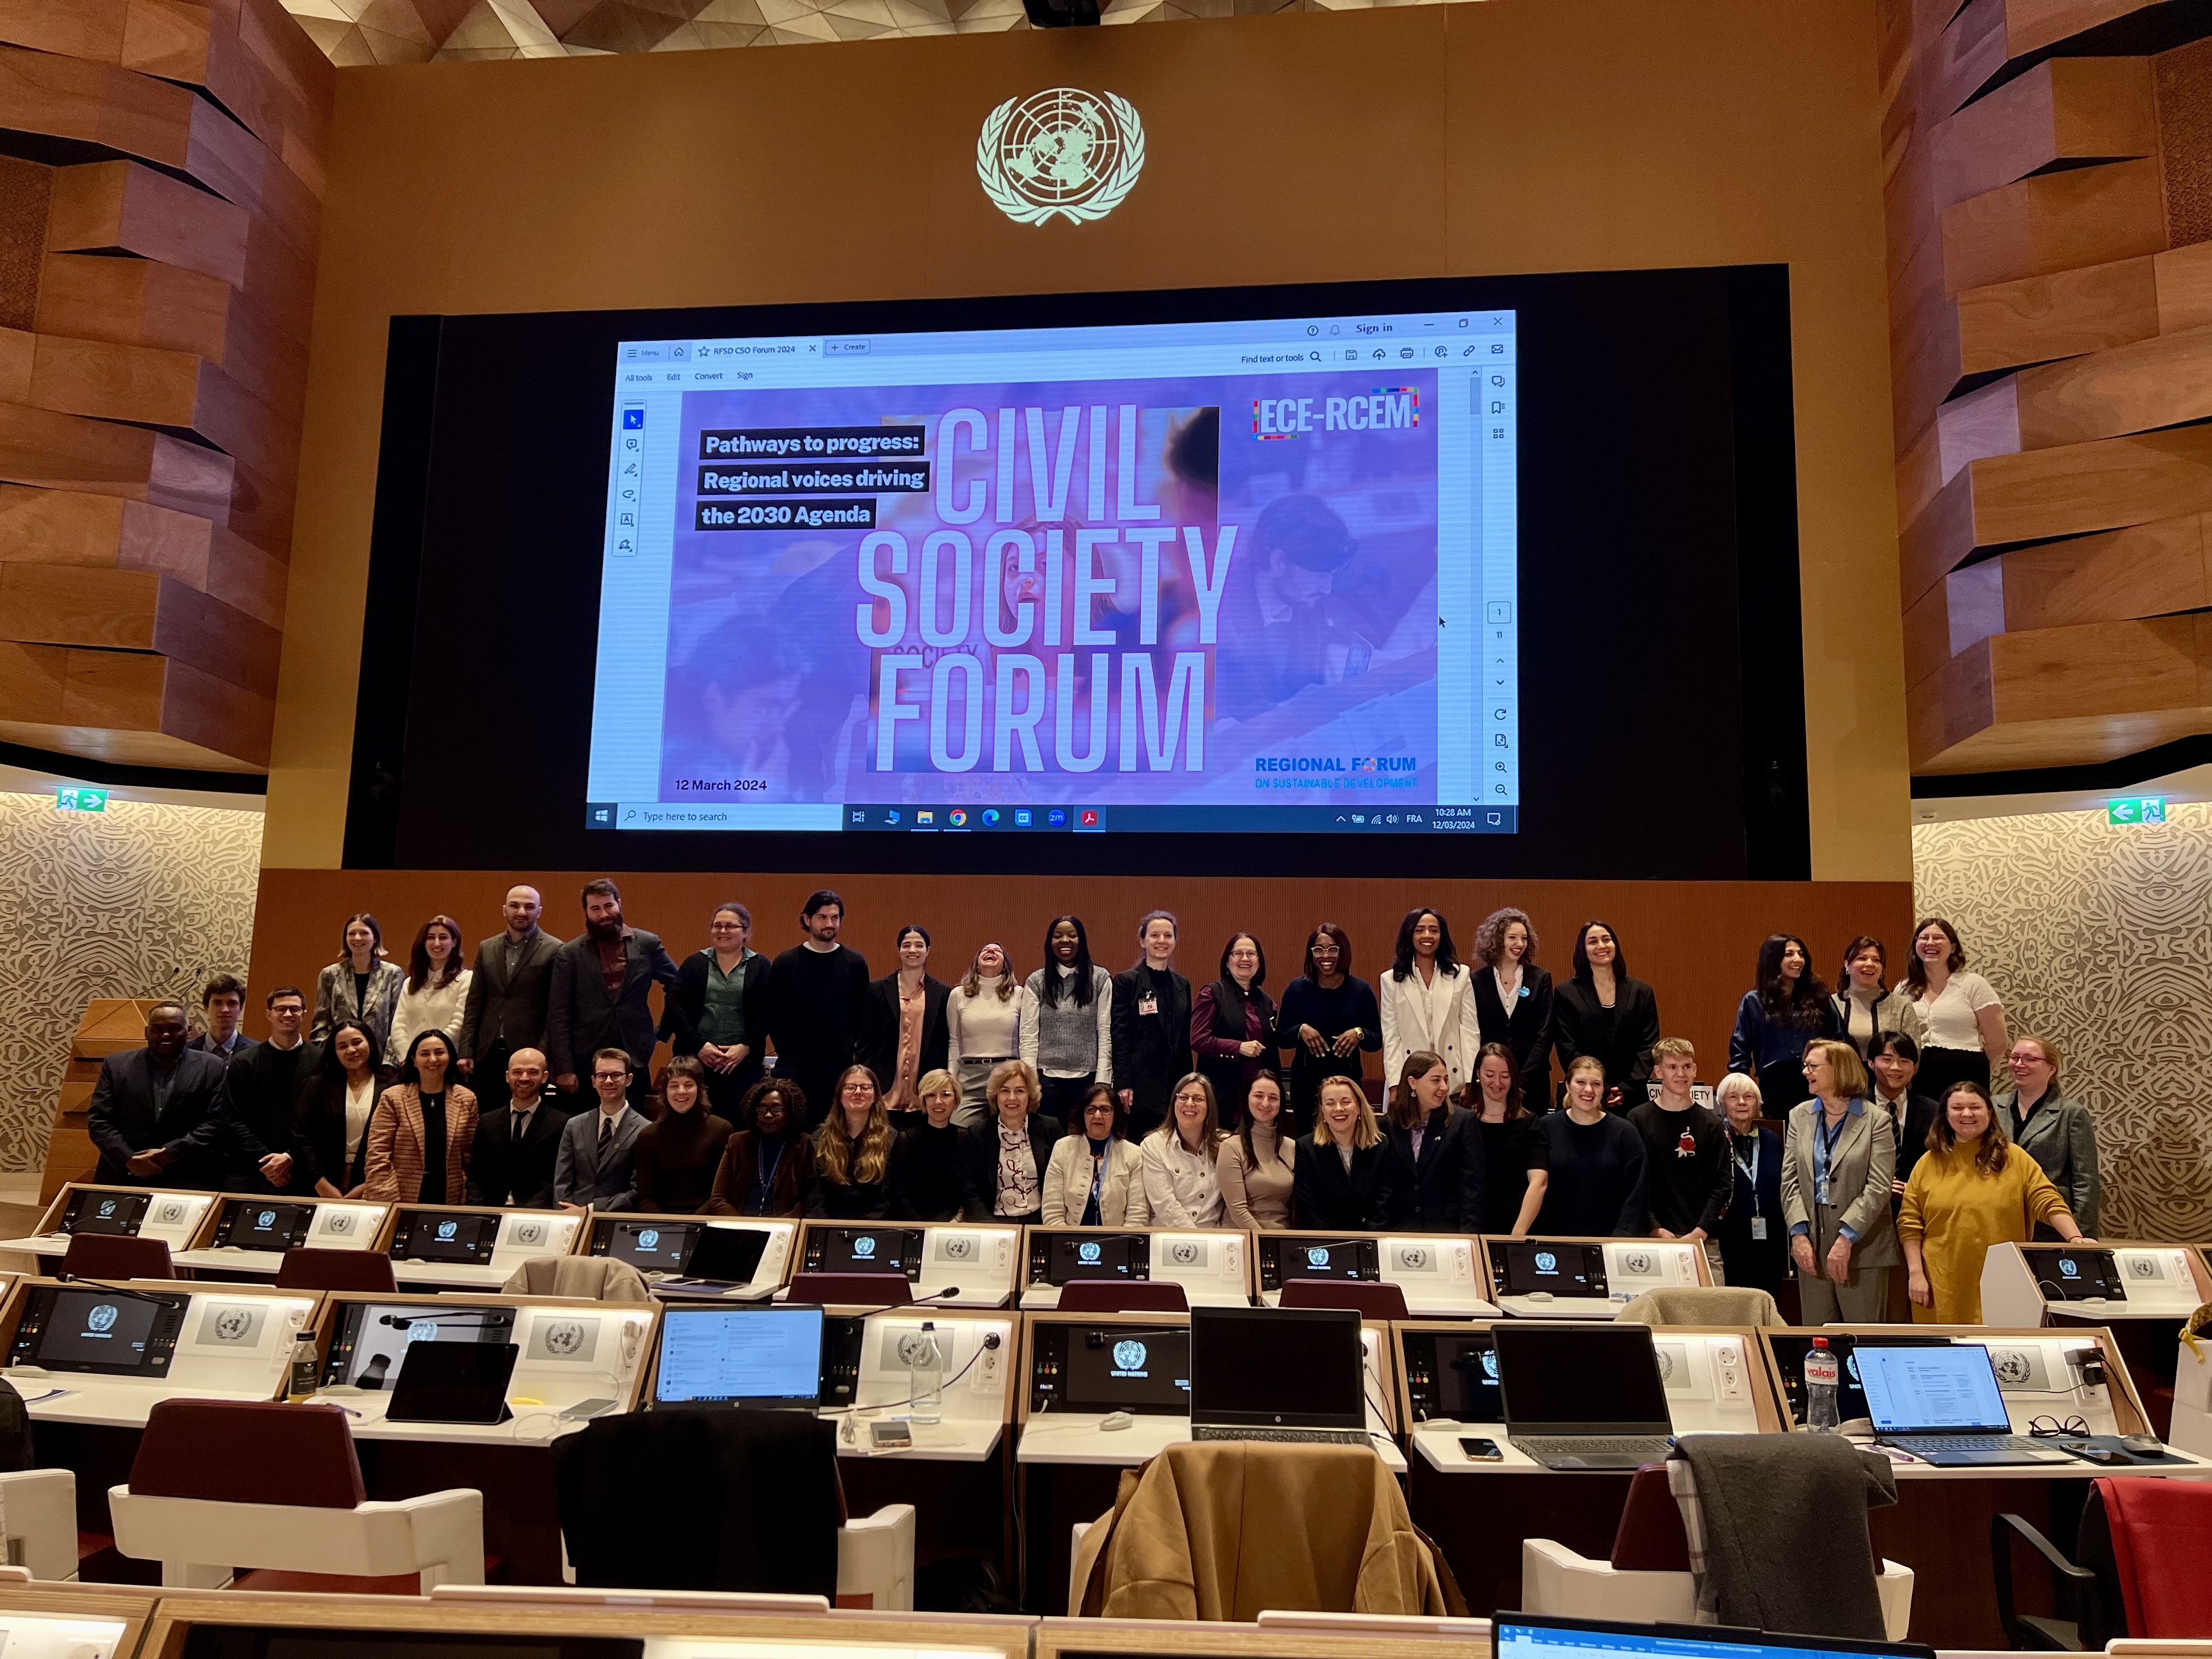 The theme of the Civil Society Forum 2024 was “Pathways to progress: Regional Voices Shaping 2030.” Credit: UN Women